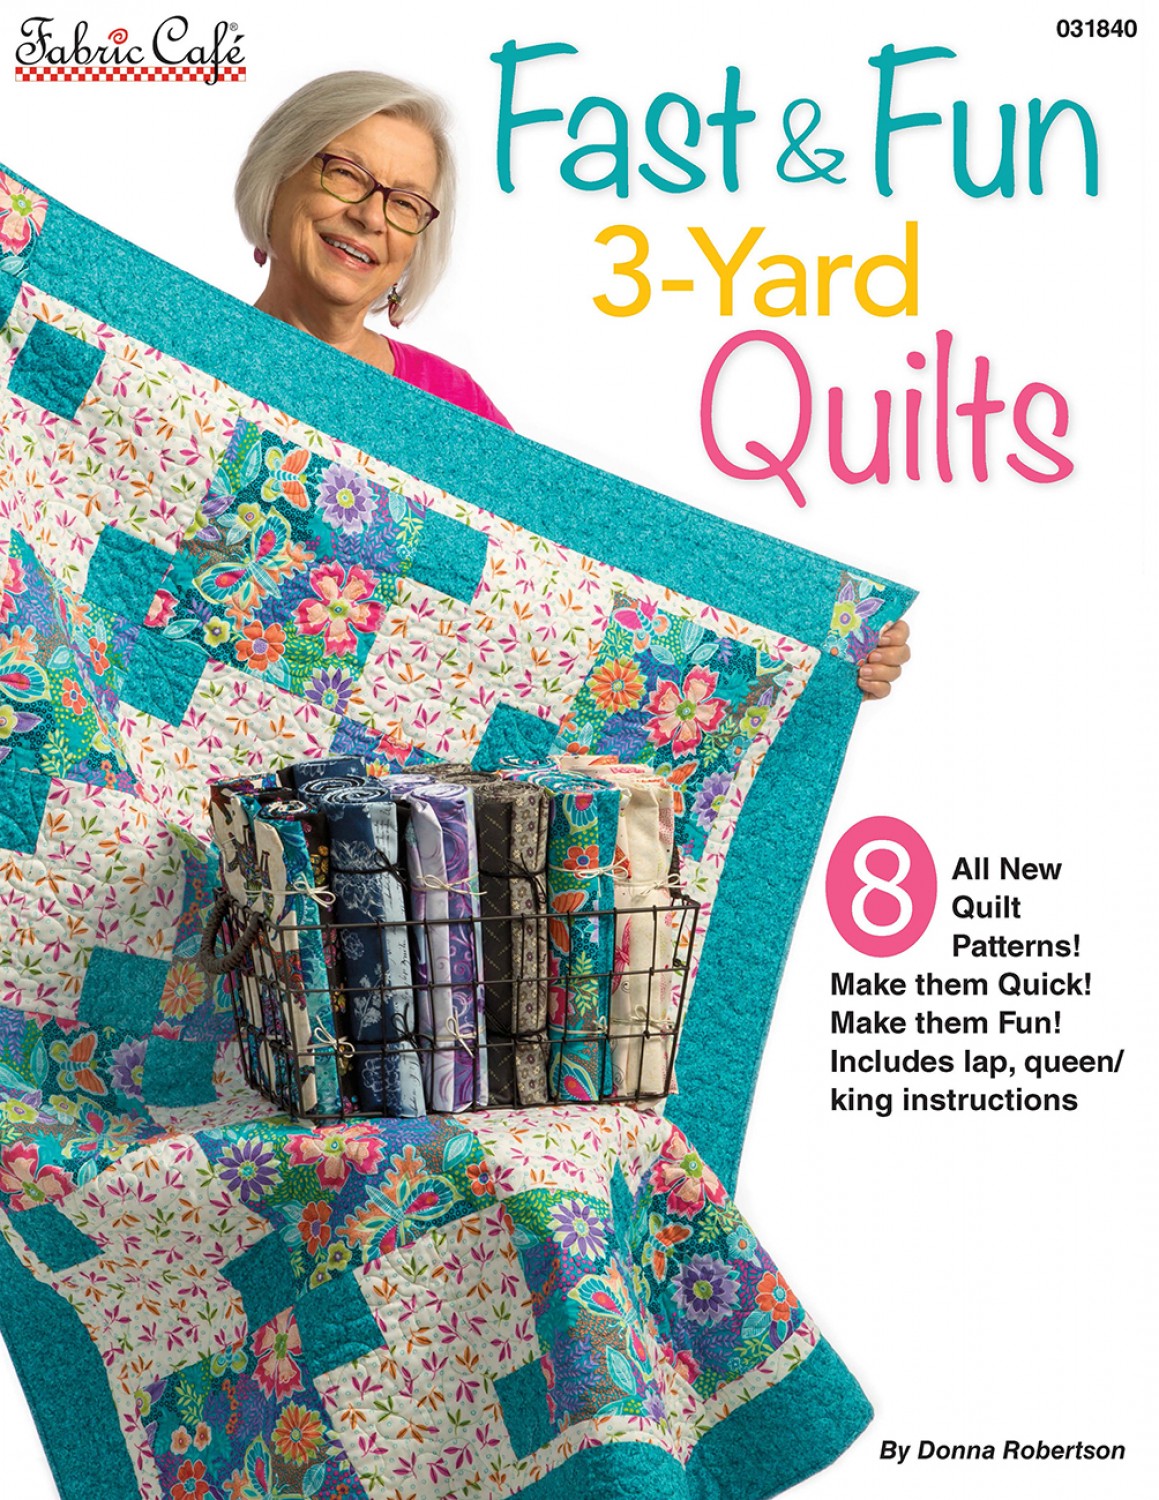 Fast & Fun 3-Yard Quilts, Pattern Book by Donna Robertson for Fabric Cafe